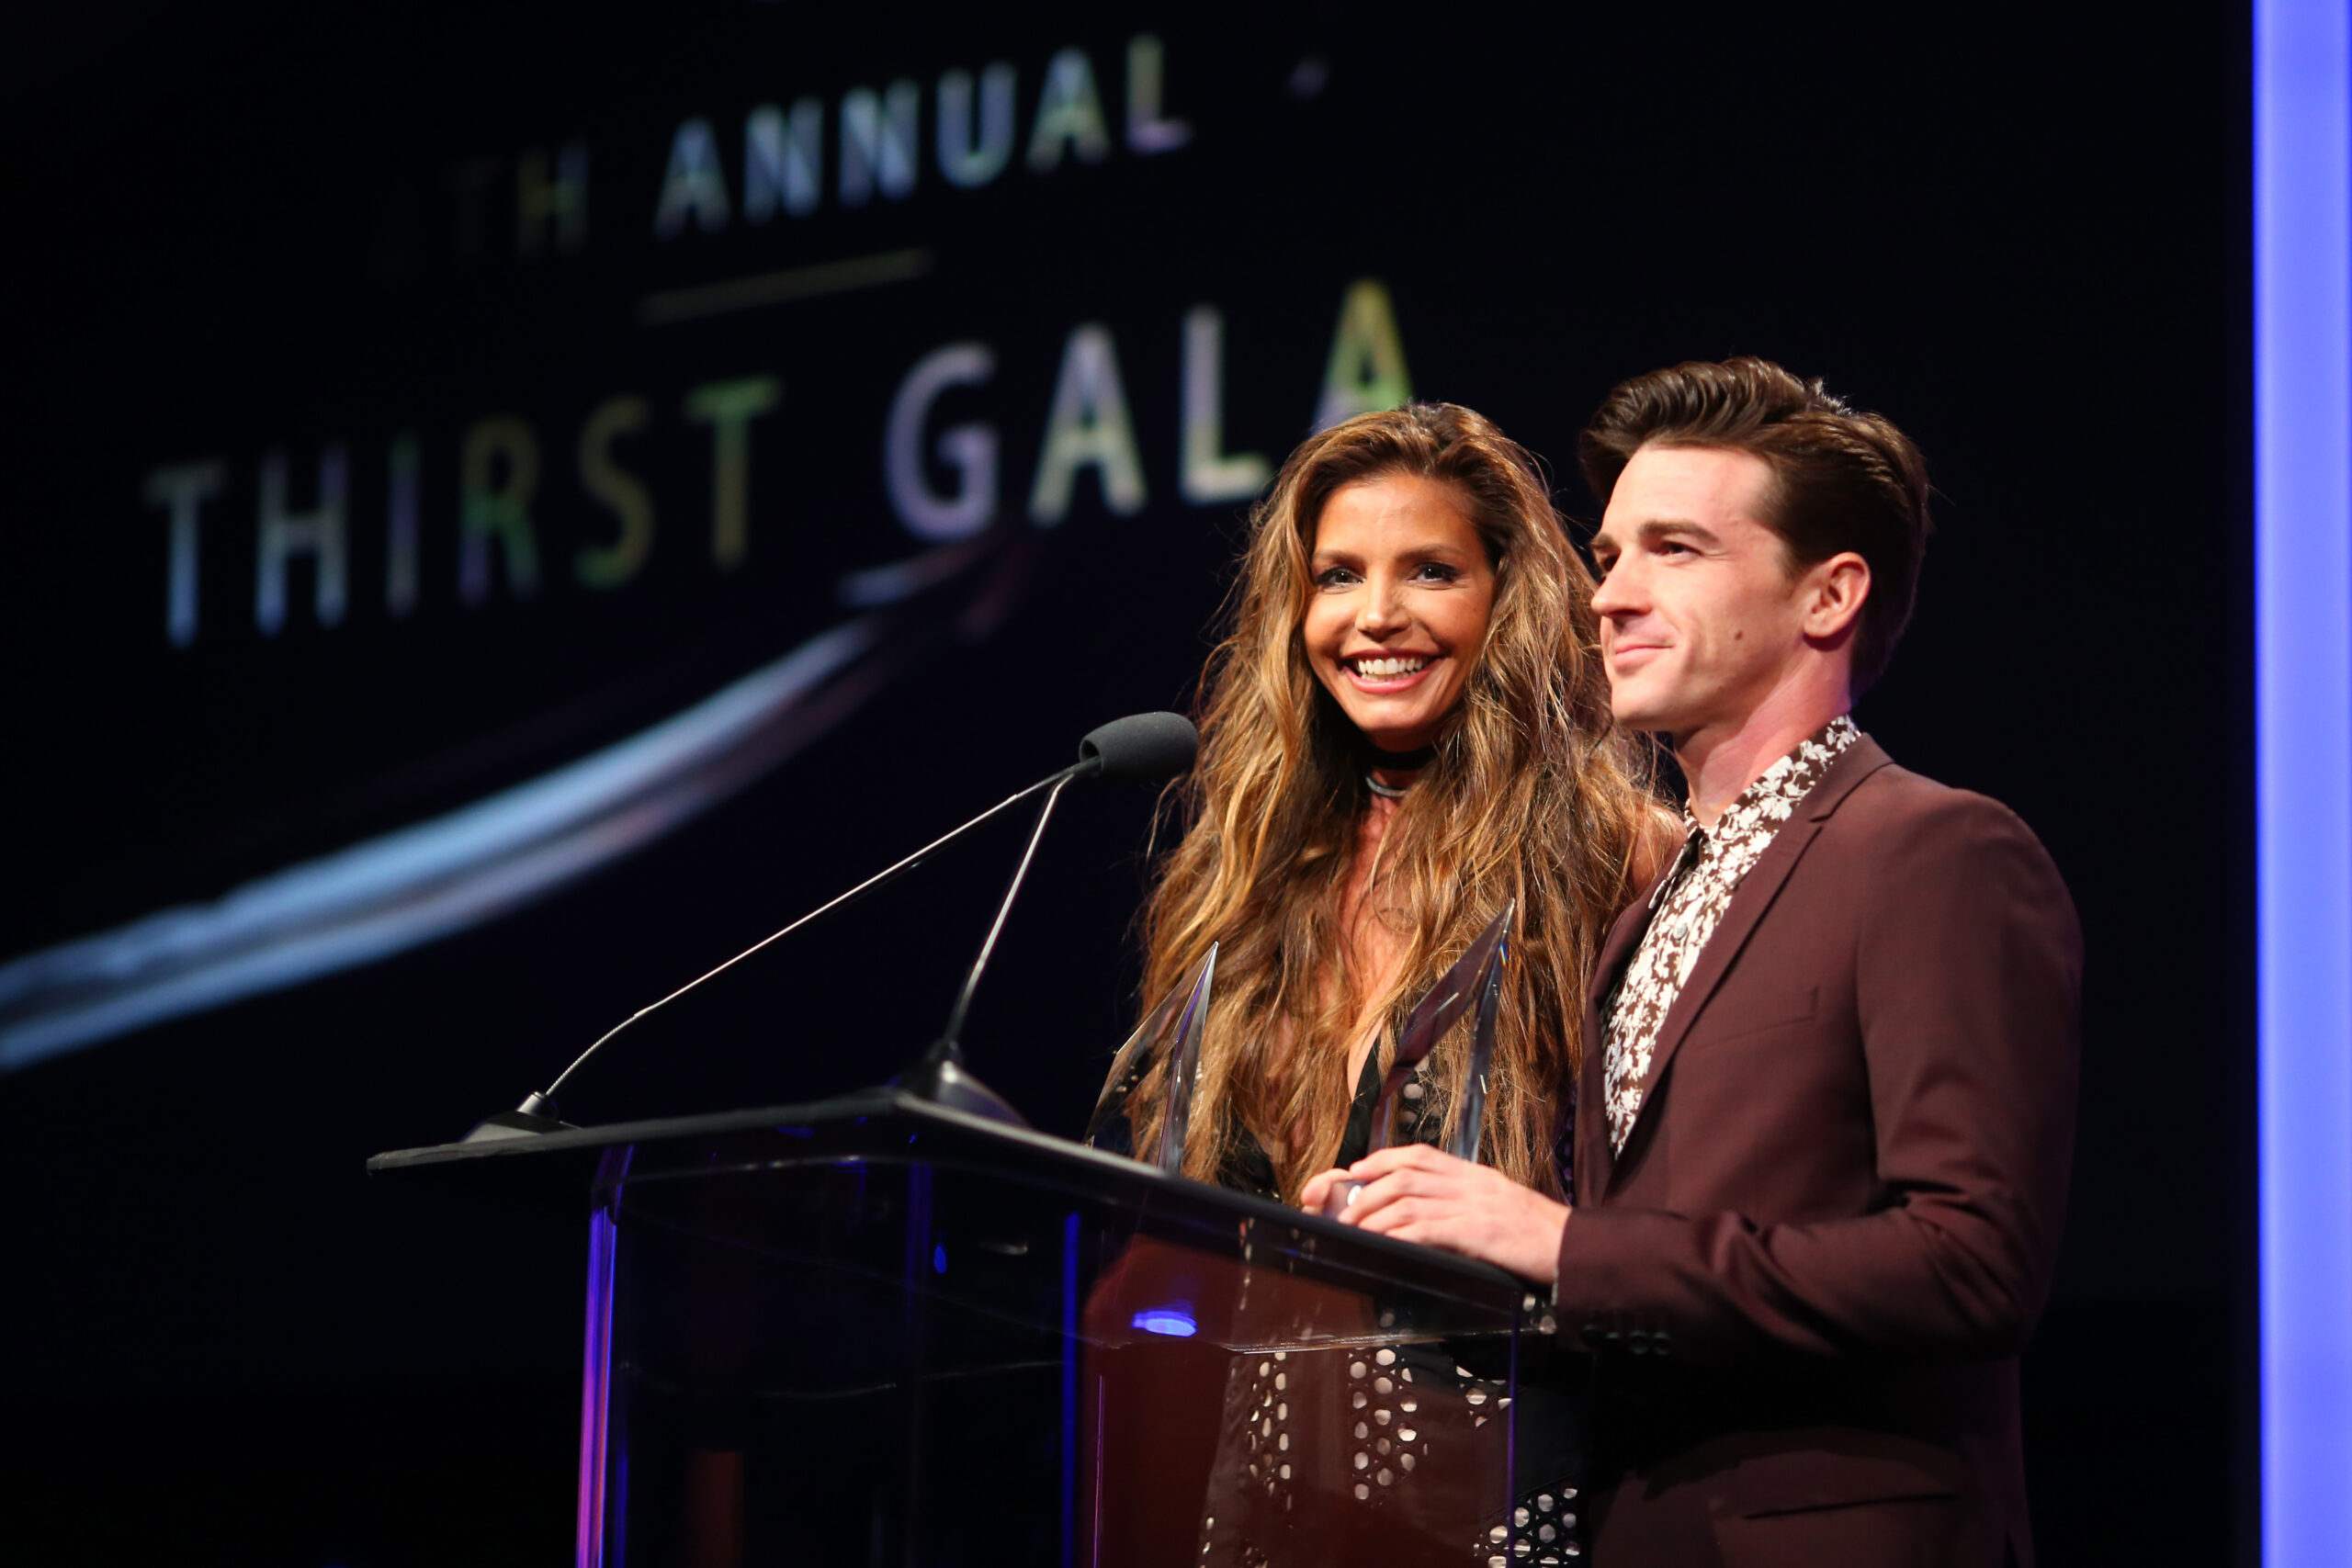 BEVERLY HILLS, CA - APRIL 18: Actors Charisma Carpenter and Drake Bell attend the Thirst Project's 8th Annual thirst Gala at Beverly Hills Hotel on April 18, 2017 in Beverly Hills, California. (Photo by Joe Scarnici/Getty Images for Thirst Project)